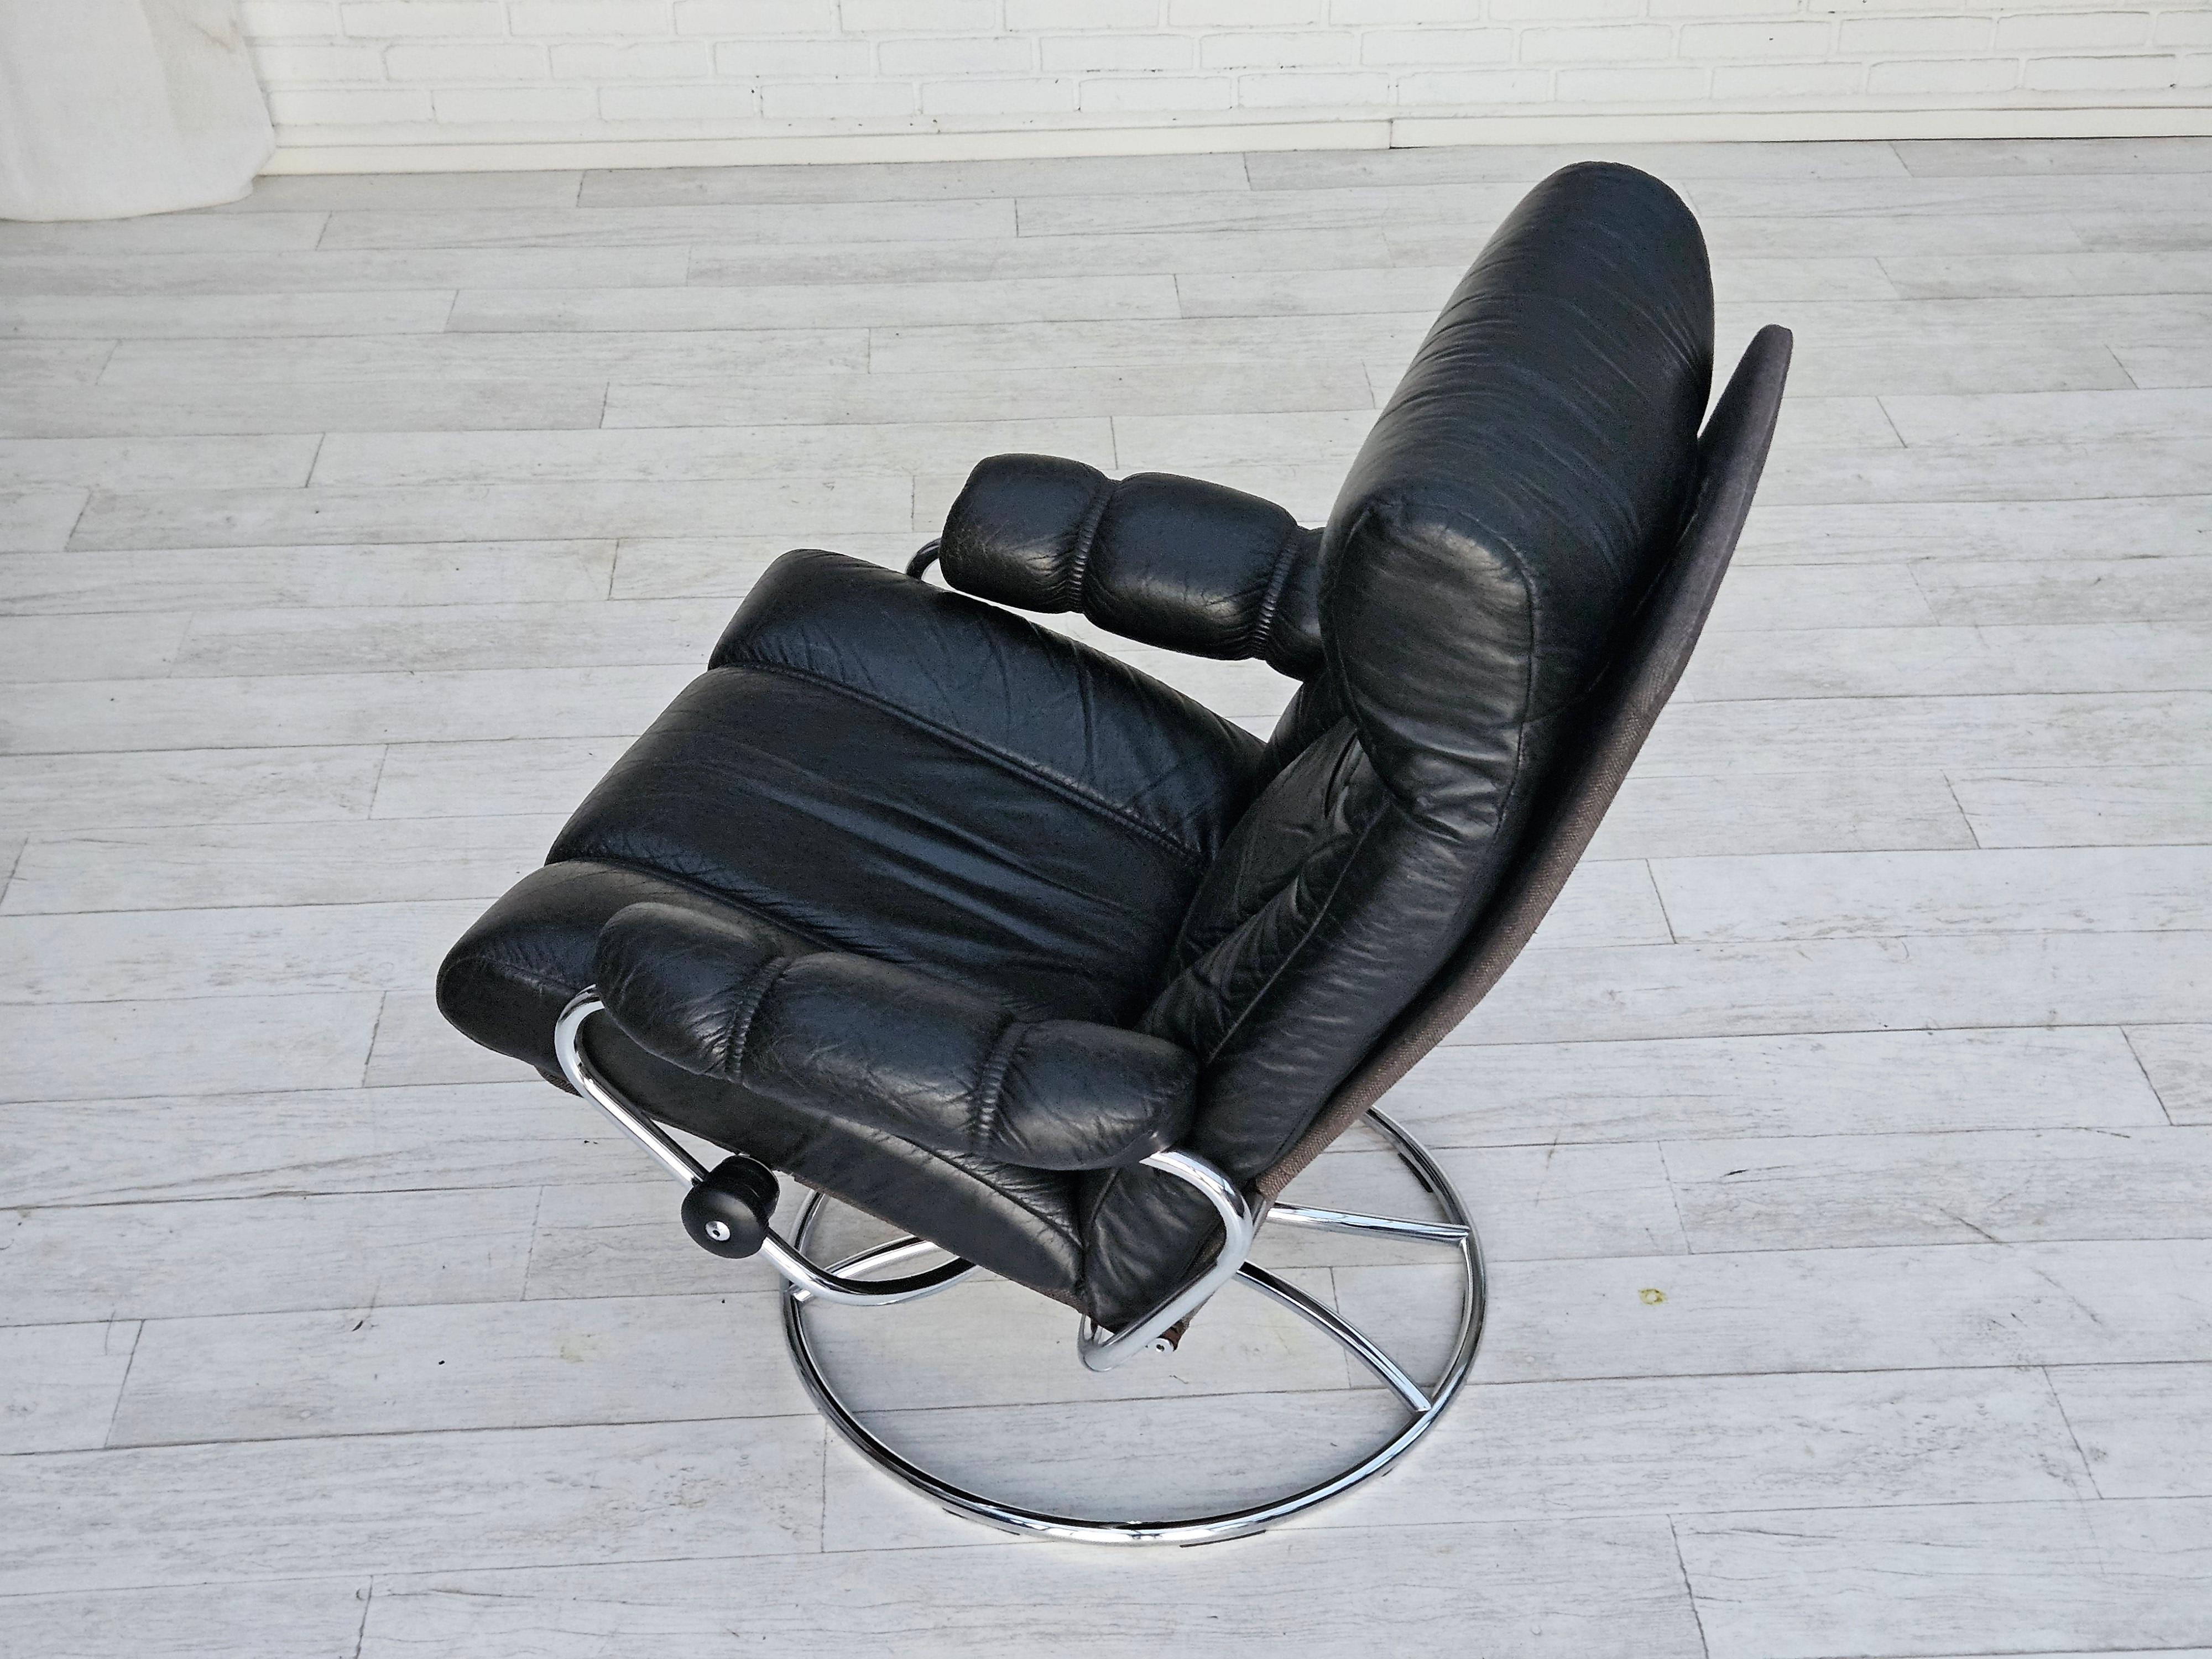 1970s, Norwegian relax swivel chair by Stressless, original very good condition. 2